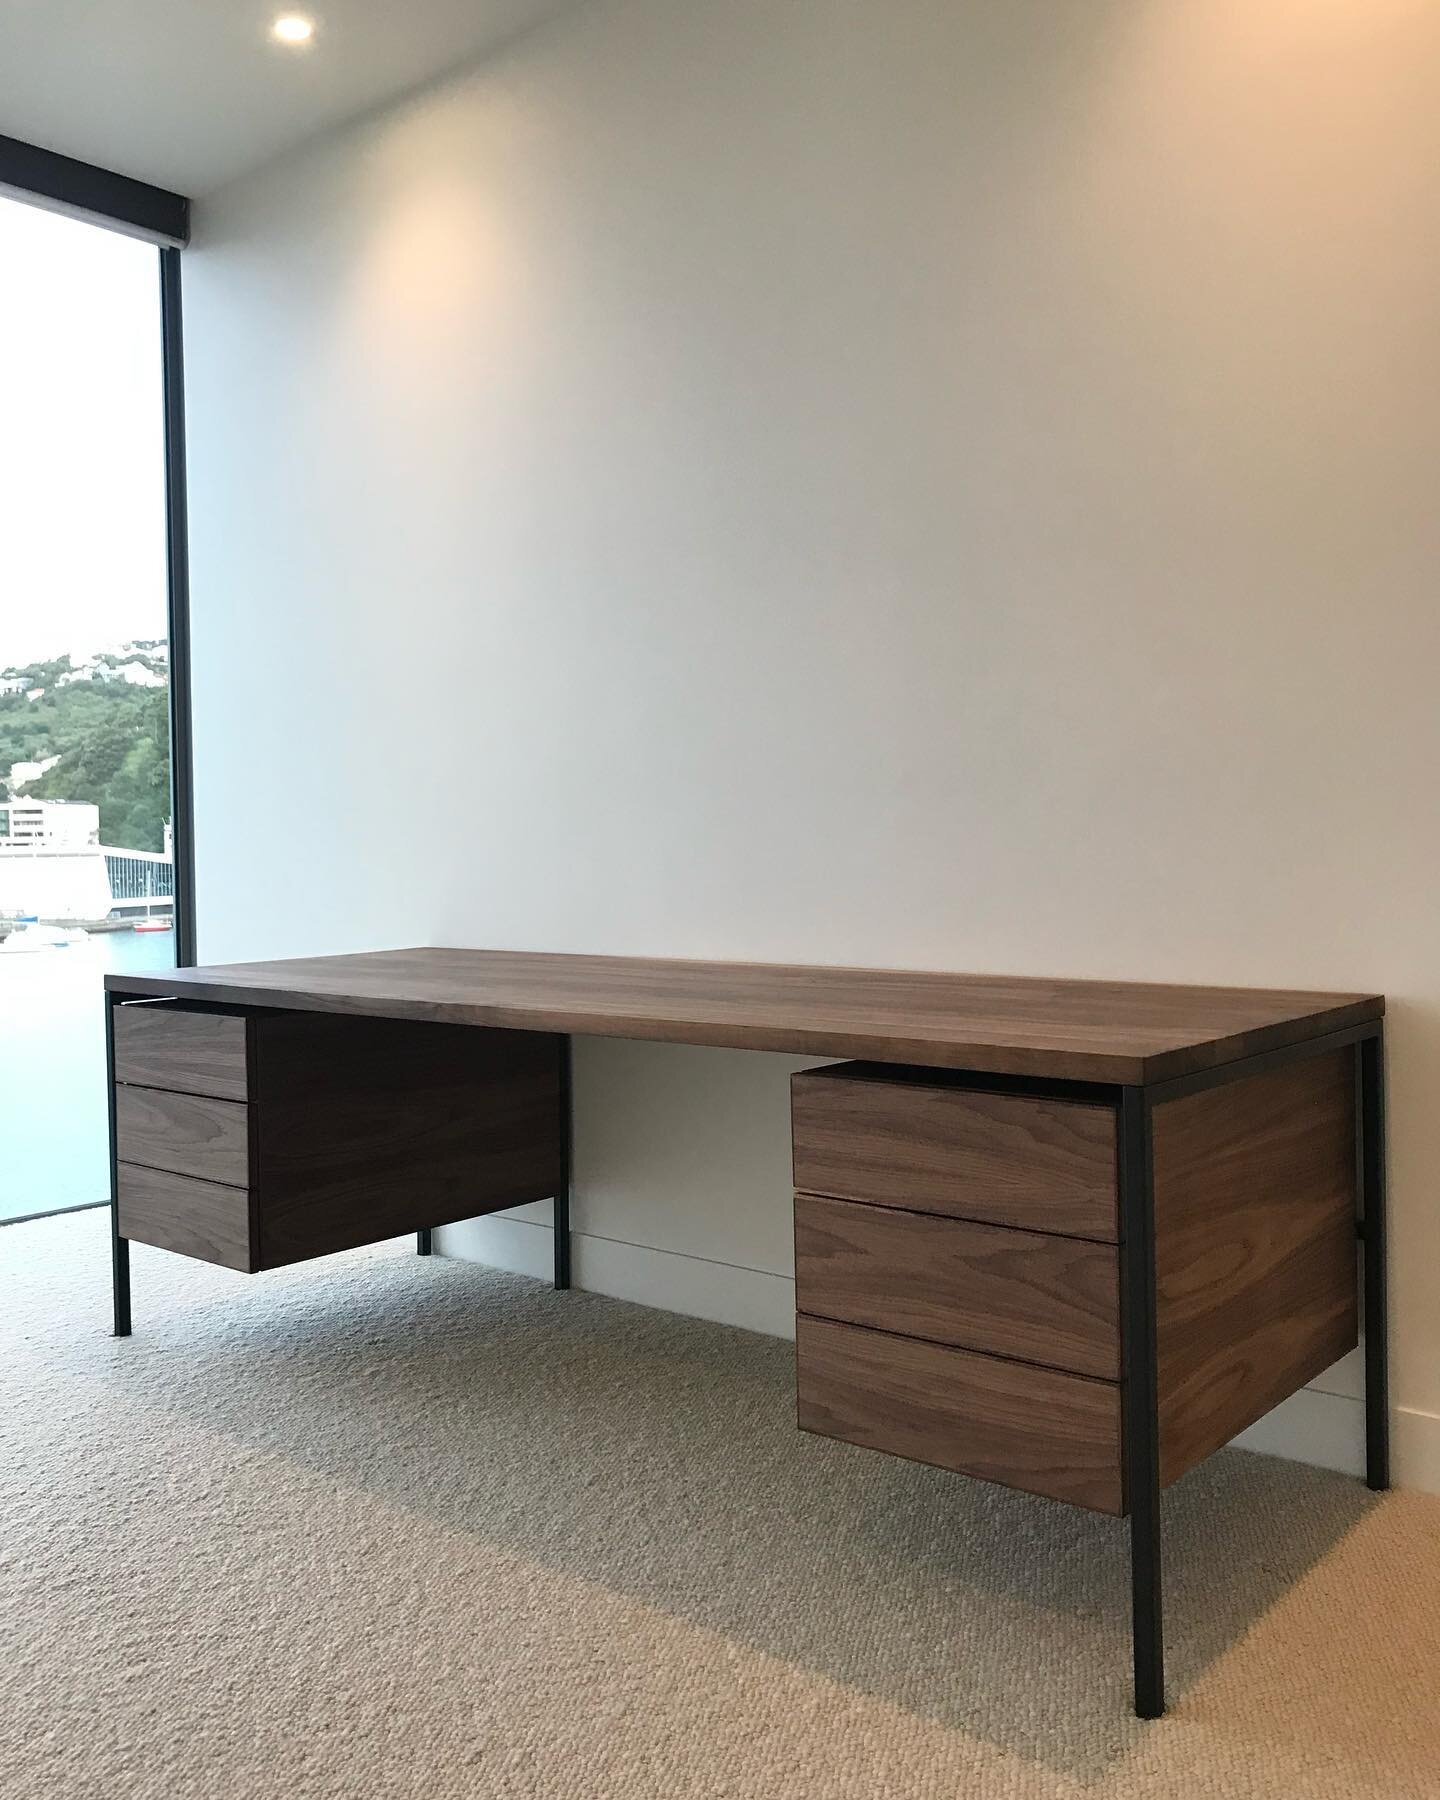 Some recently completed joinery work. This is a home office desk created for some wonderful clients. Made from solid walnut on a square profile extruded steel frame, powder coated matte black. The drawers are hung from the steel frame and appear to f